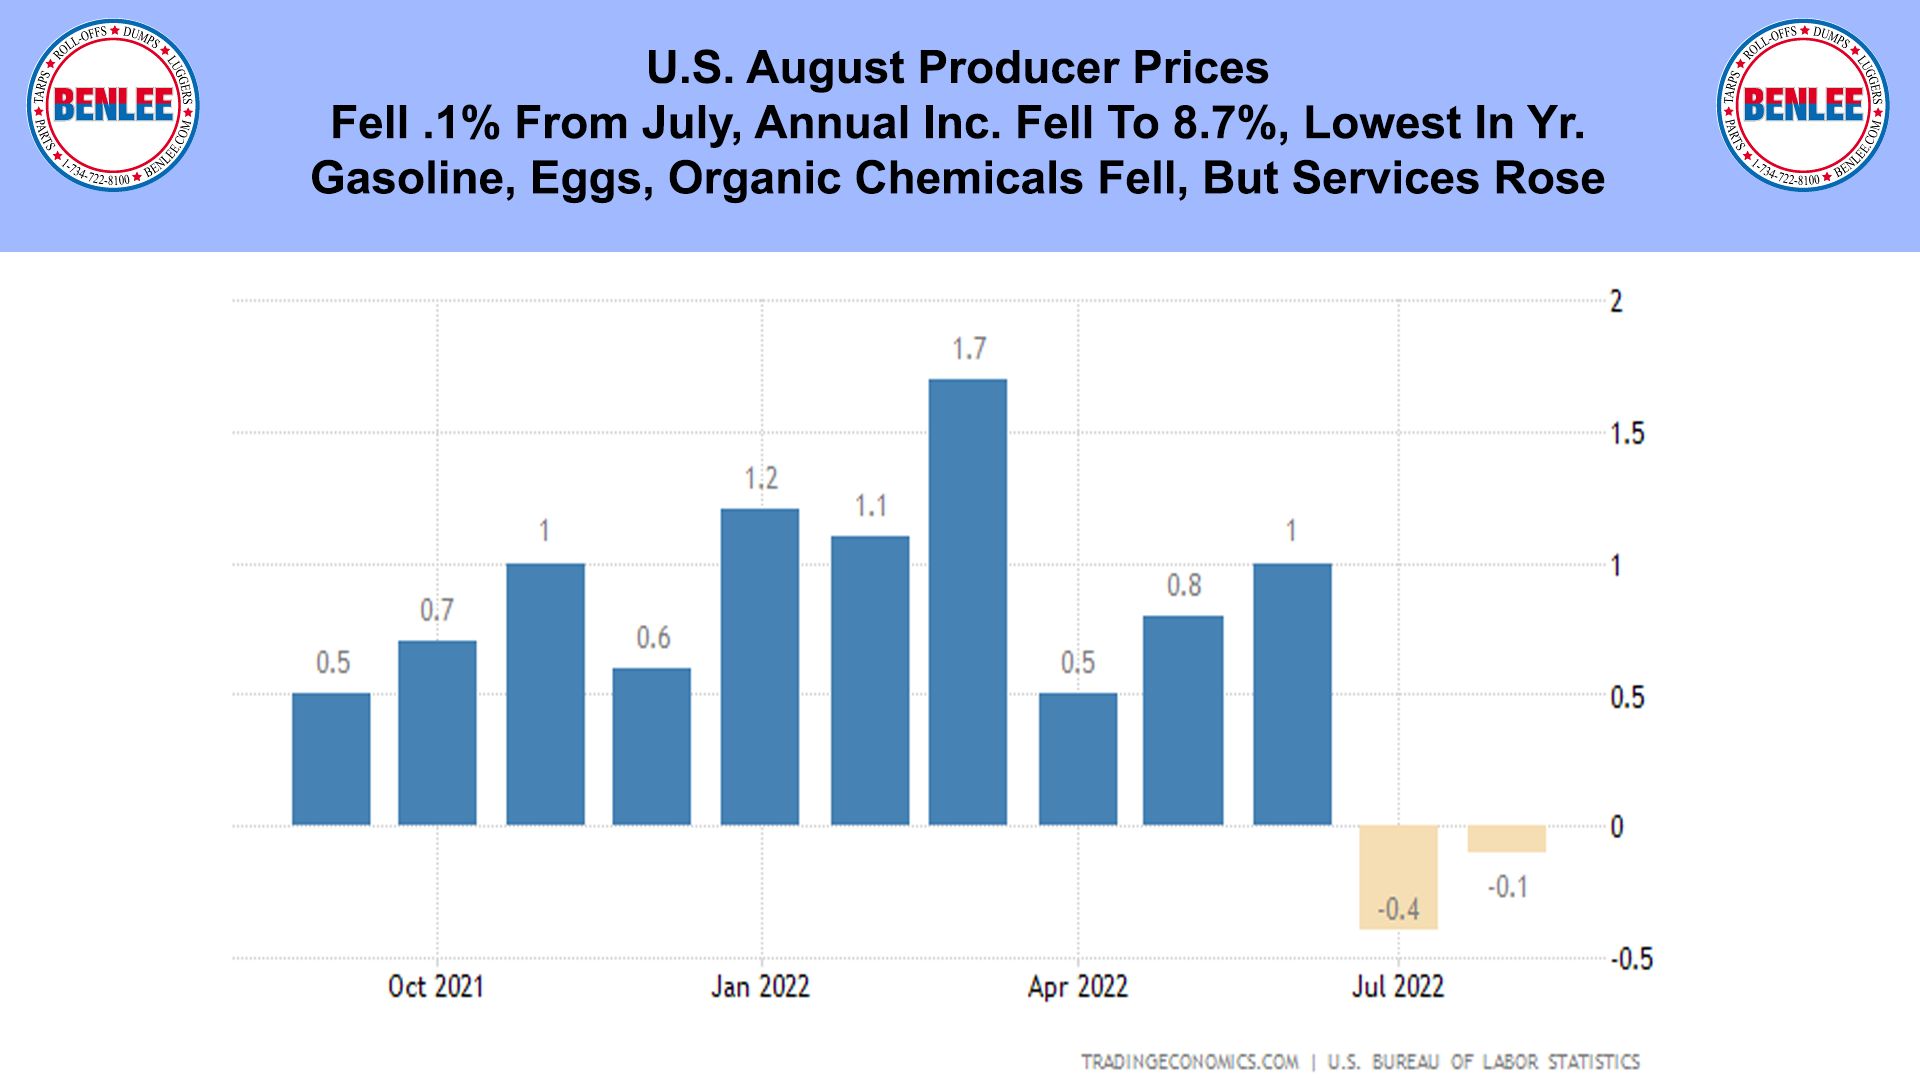 U.S. August Producer Prices